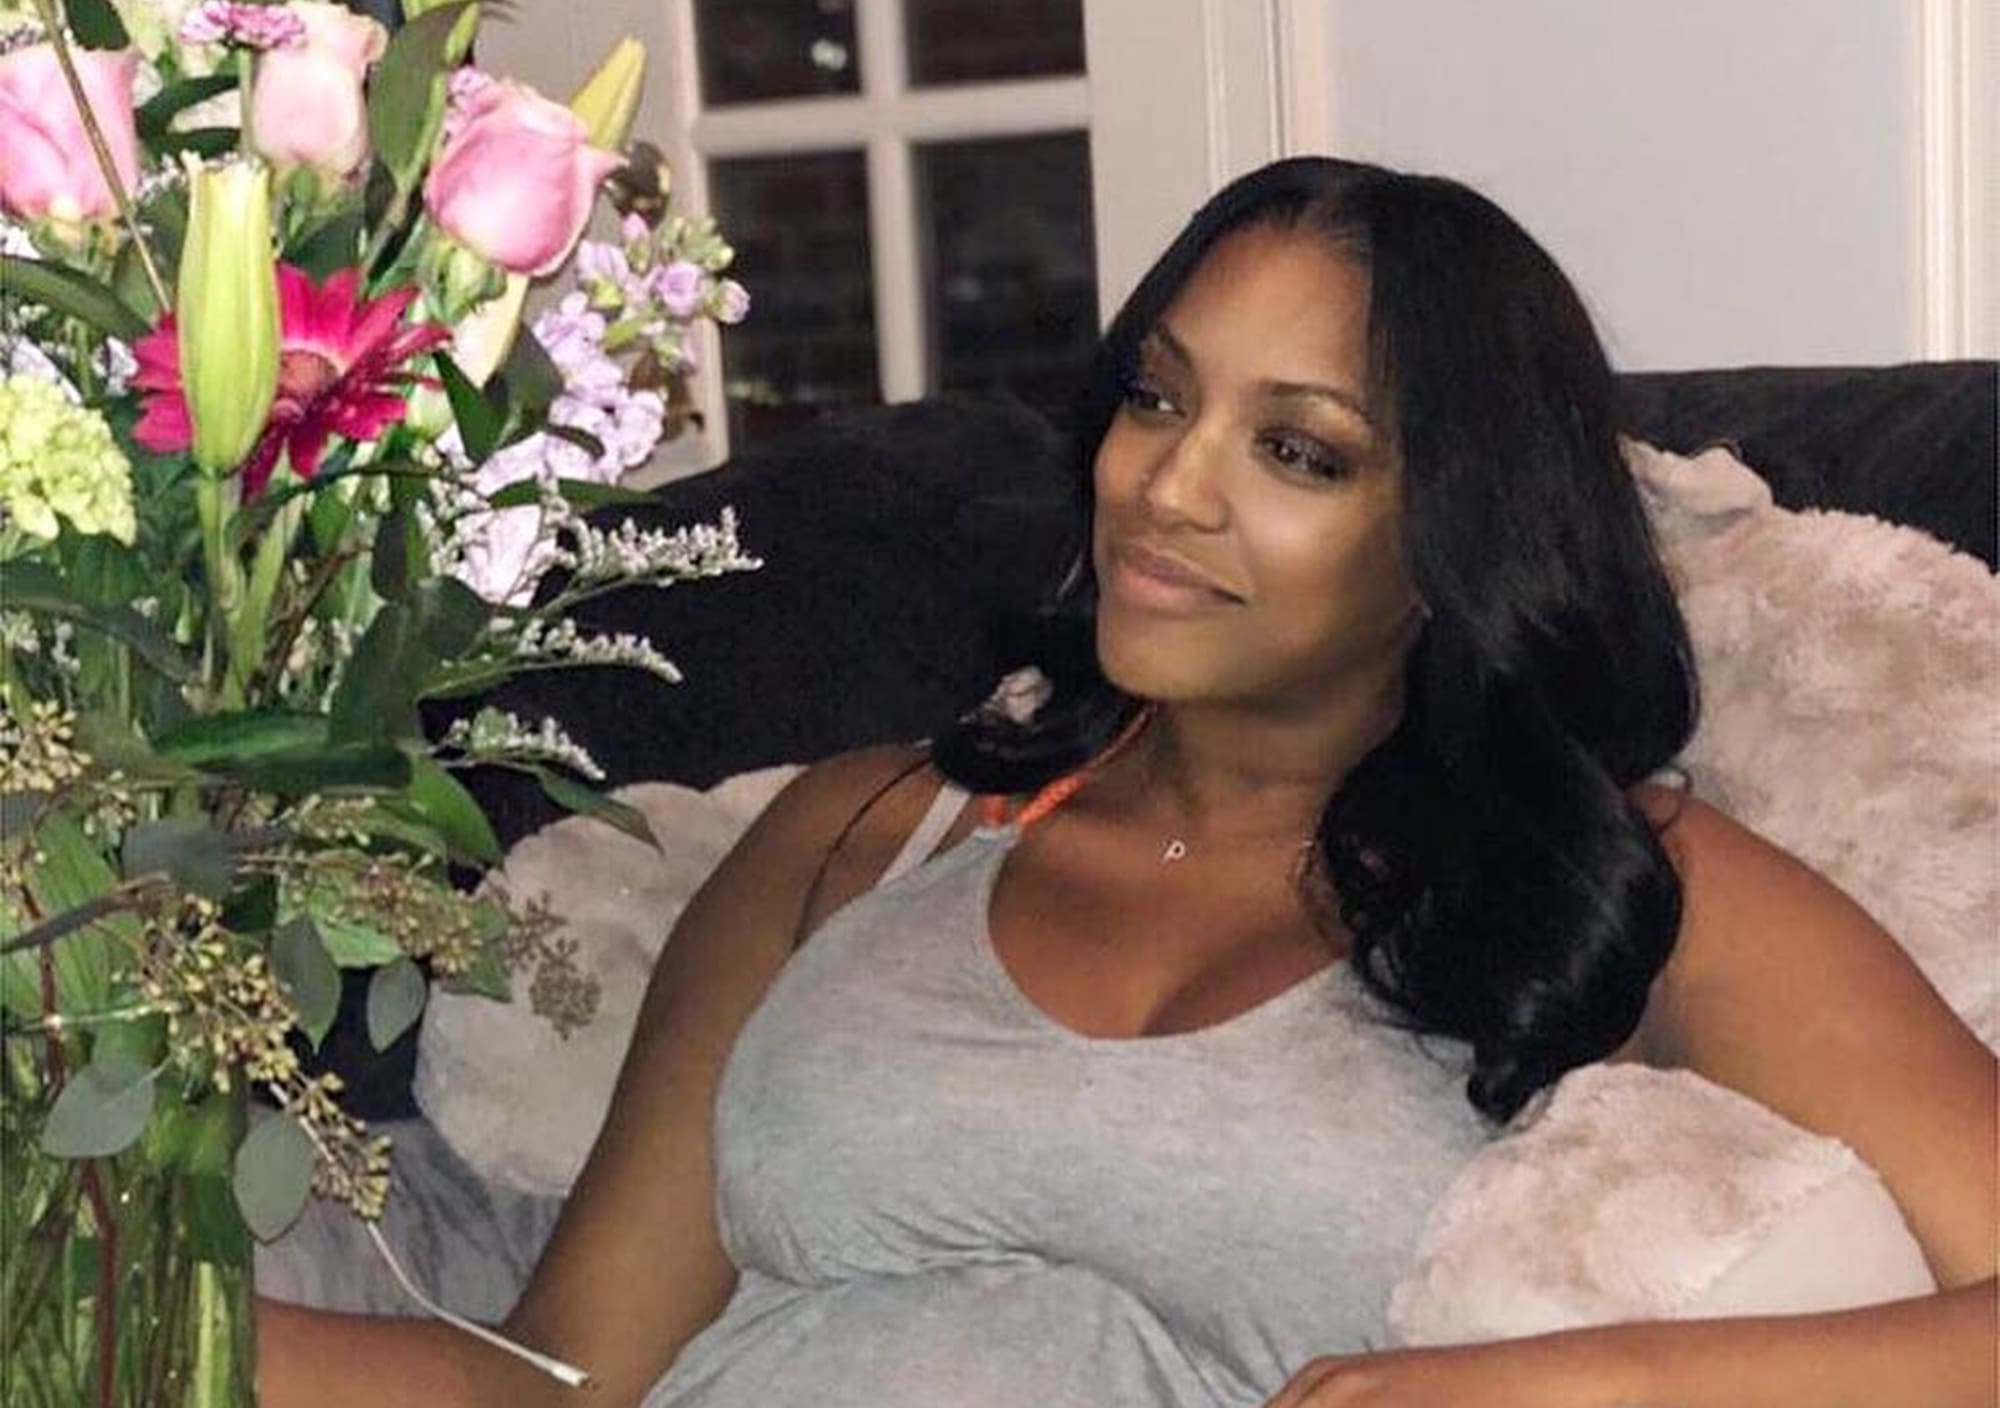 Porsha Williams Flaunts The Gift That Marlo Hampton Gave Her - Fans Adore Her Amazing 'Baby Glow'